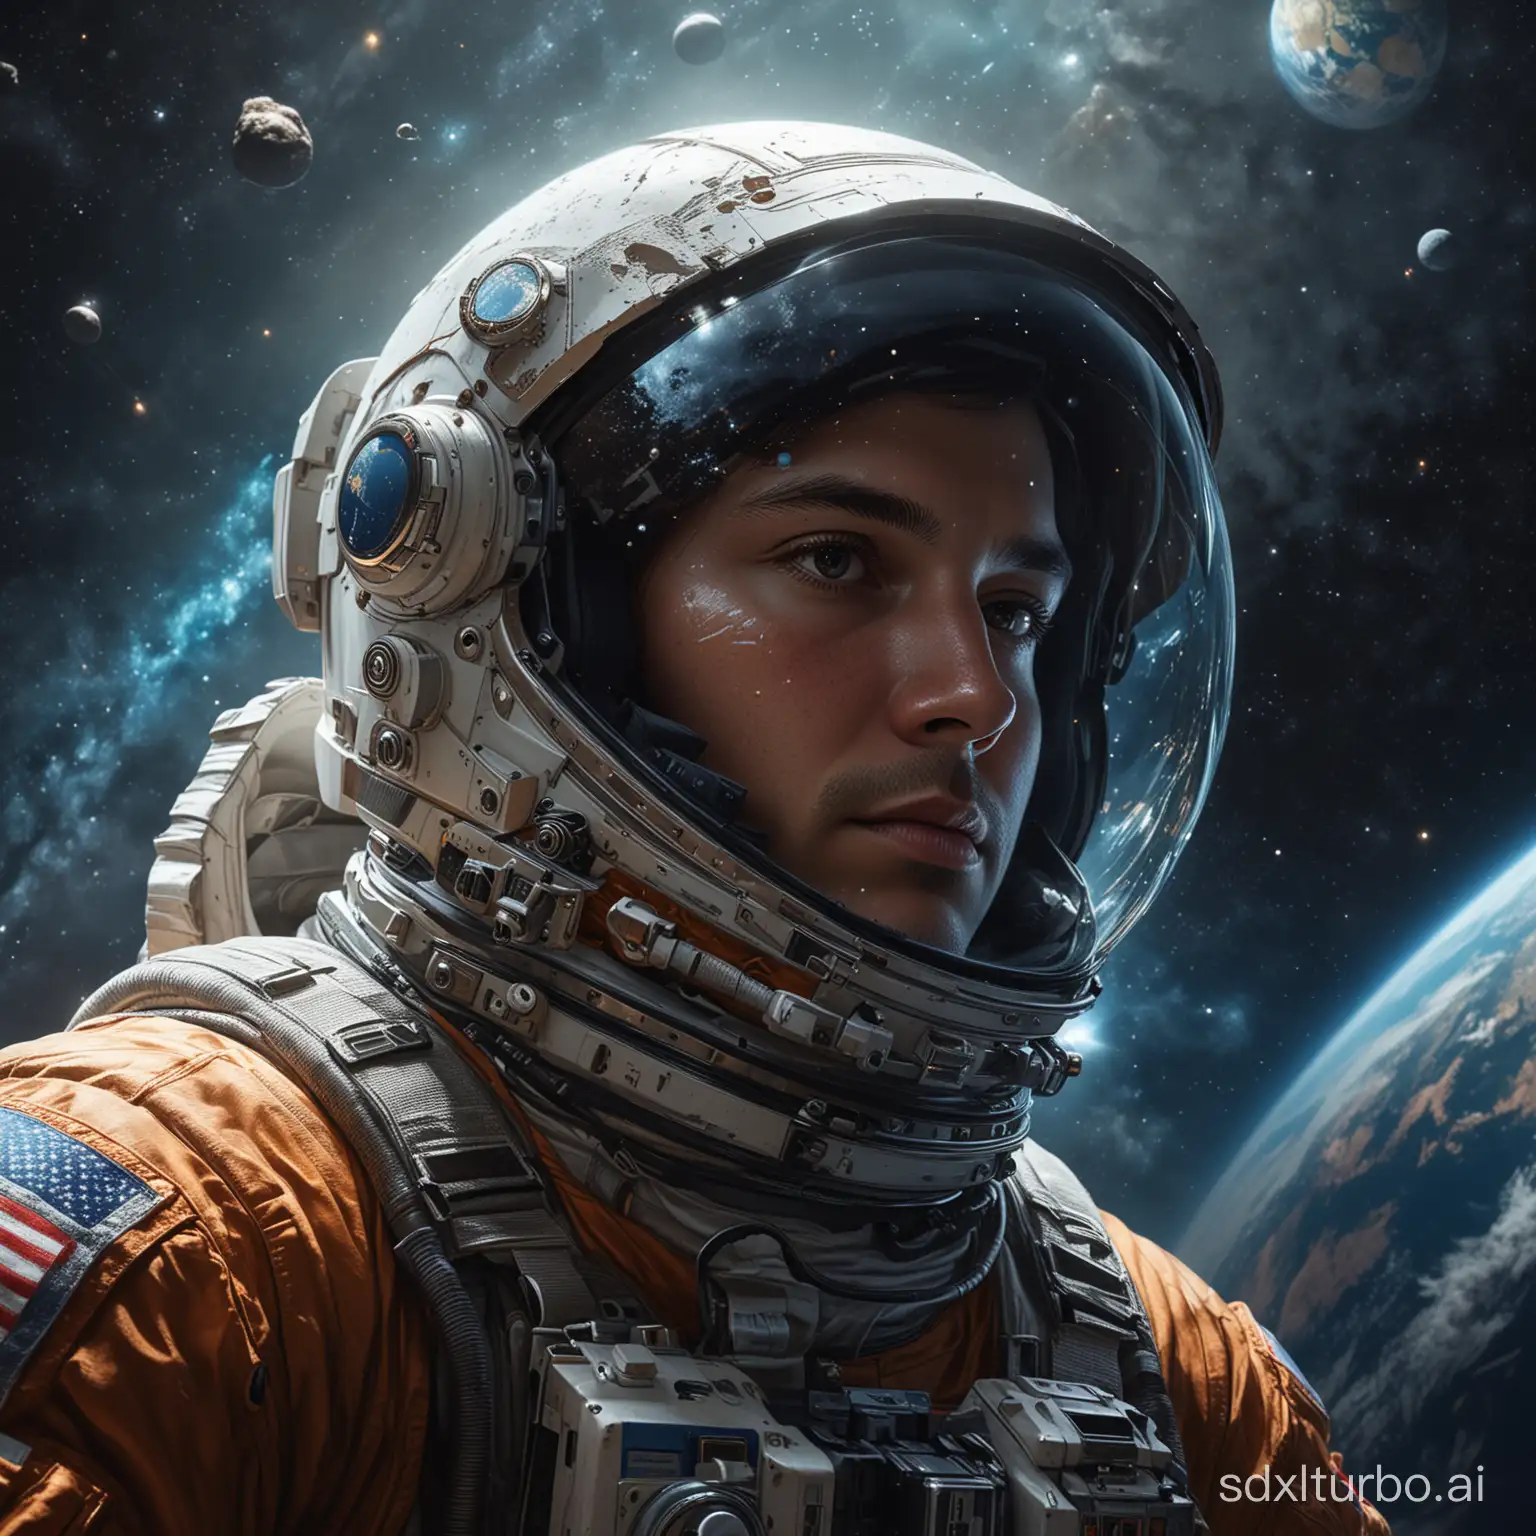 Astronaut-Floating-in-Space-with-Earth-Reflection-Digital-Painting-Illustration-by-Ruan-Jia-and-Steve-McCurry